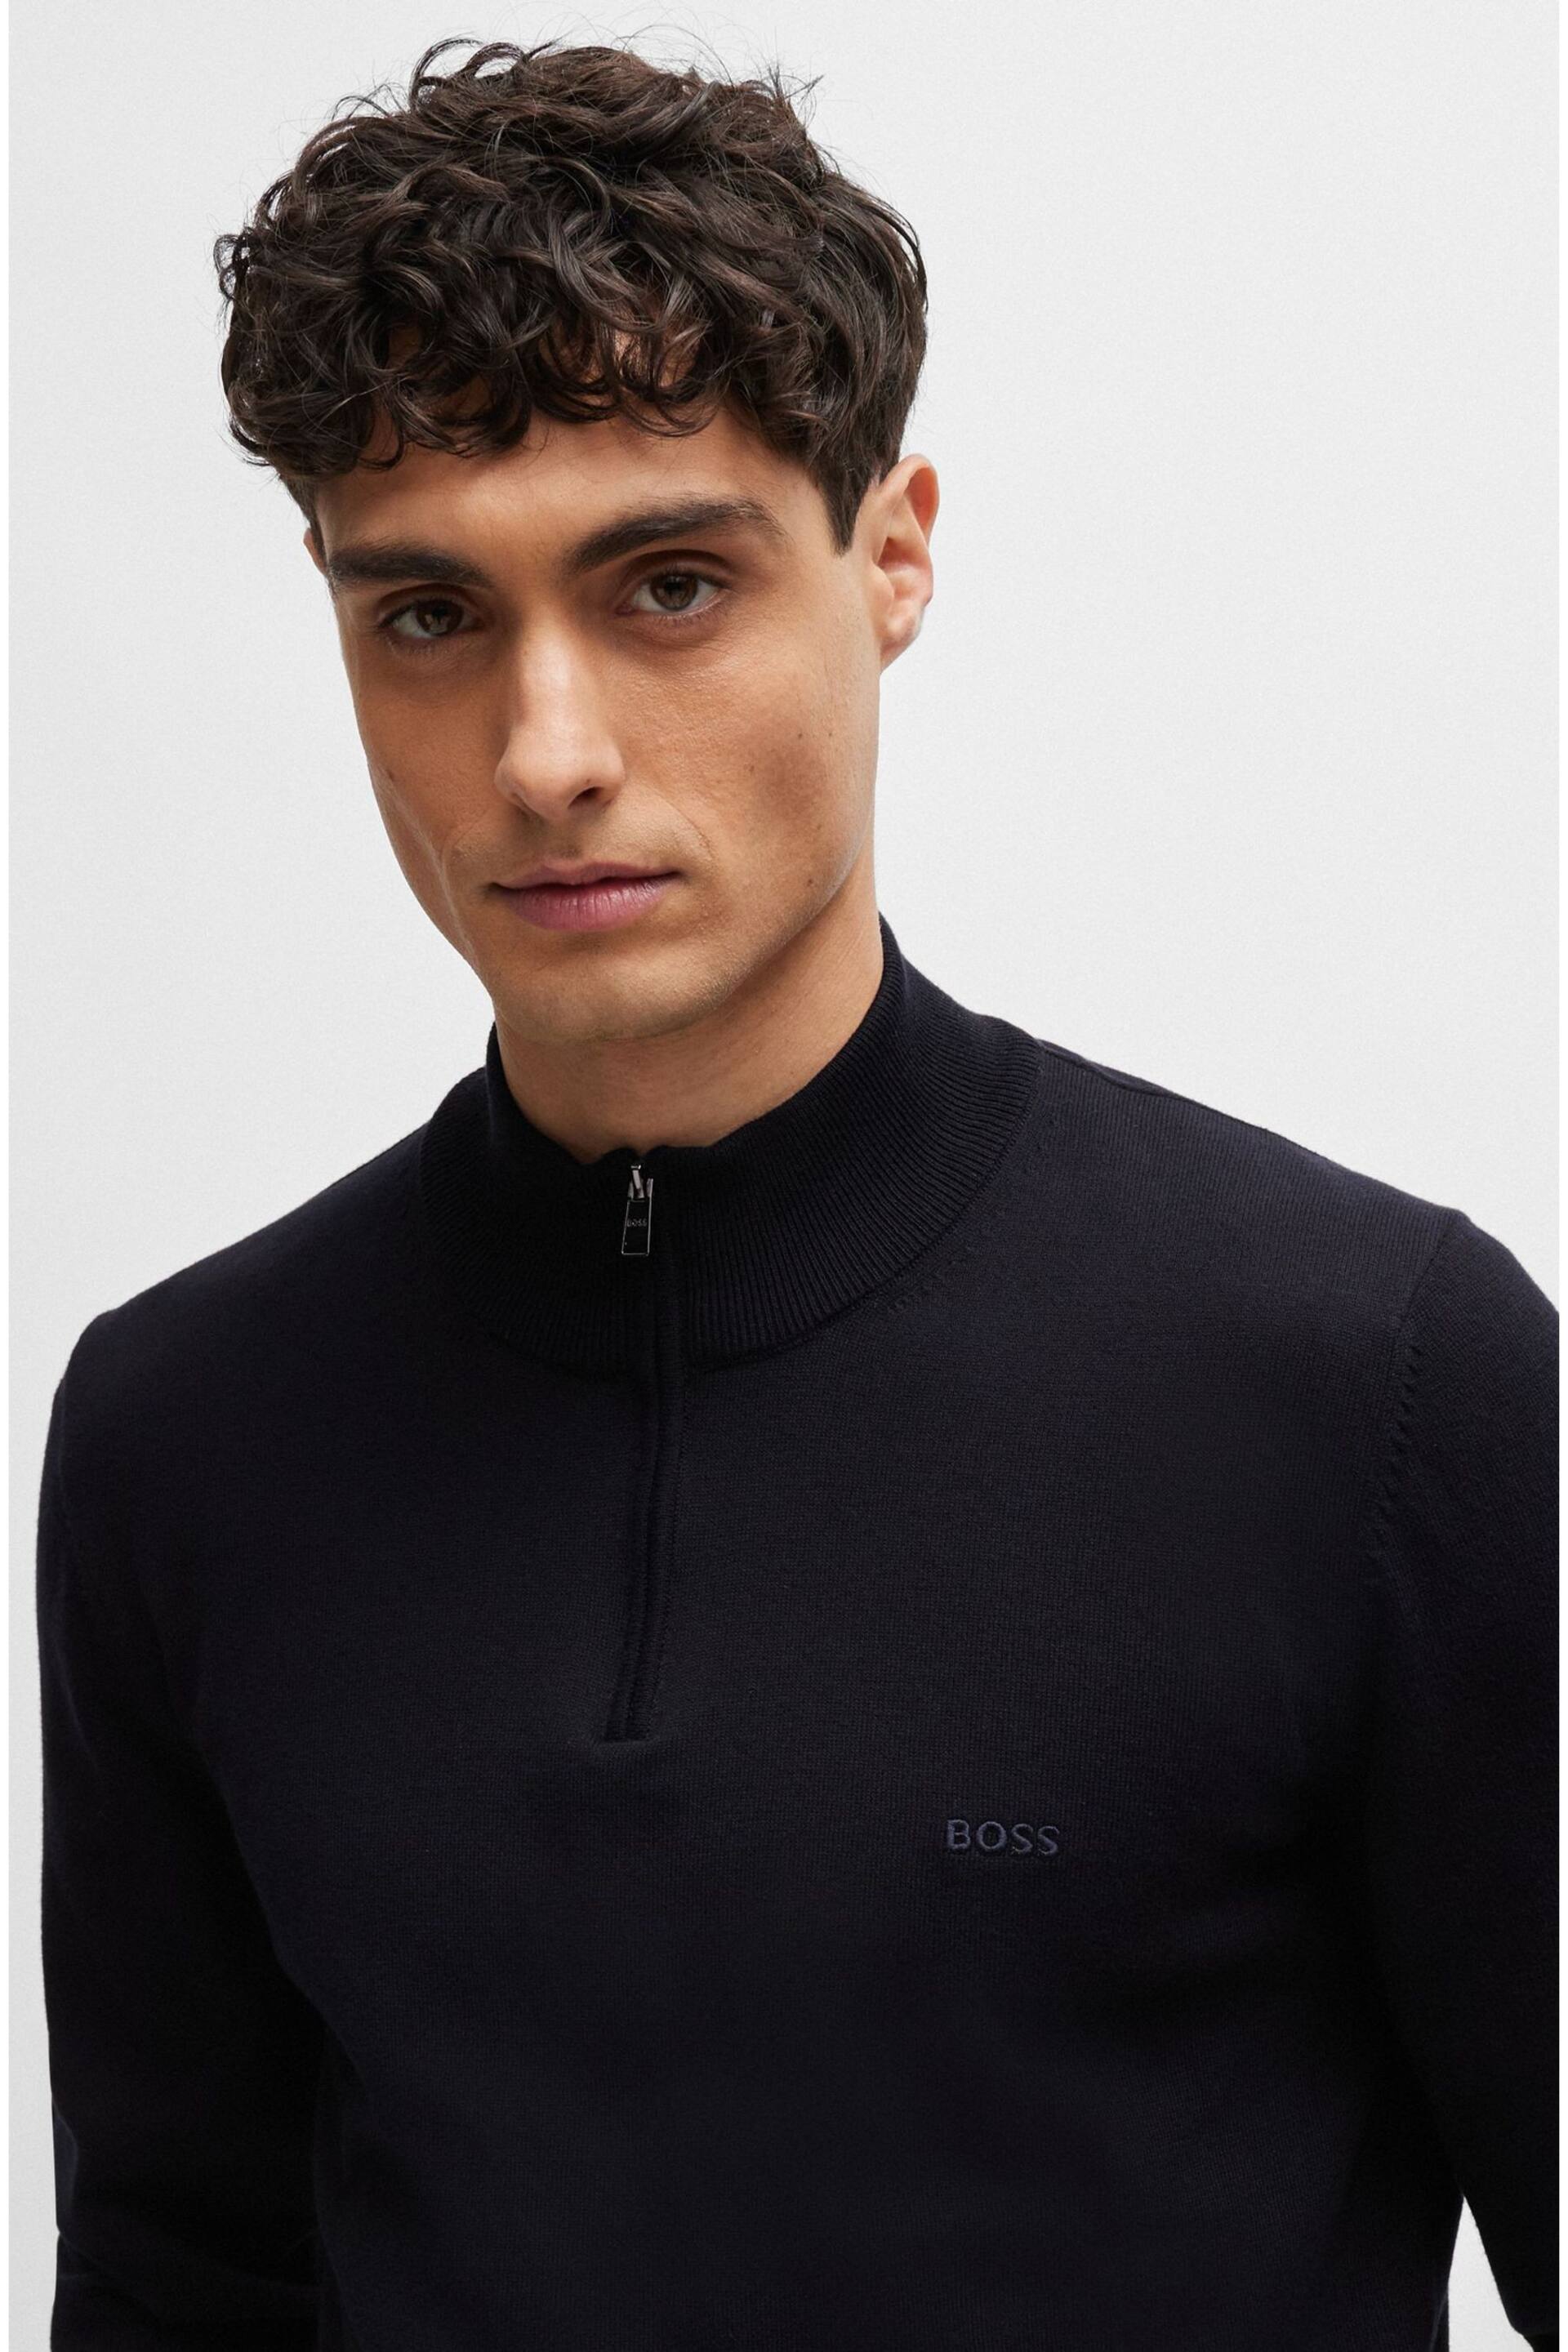 BOSS Dark Blue Cotton-Jersey Zip-Neck Sweater With Embroidered Logo - Image 4 of 5